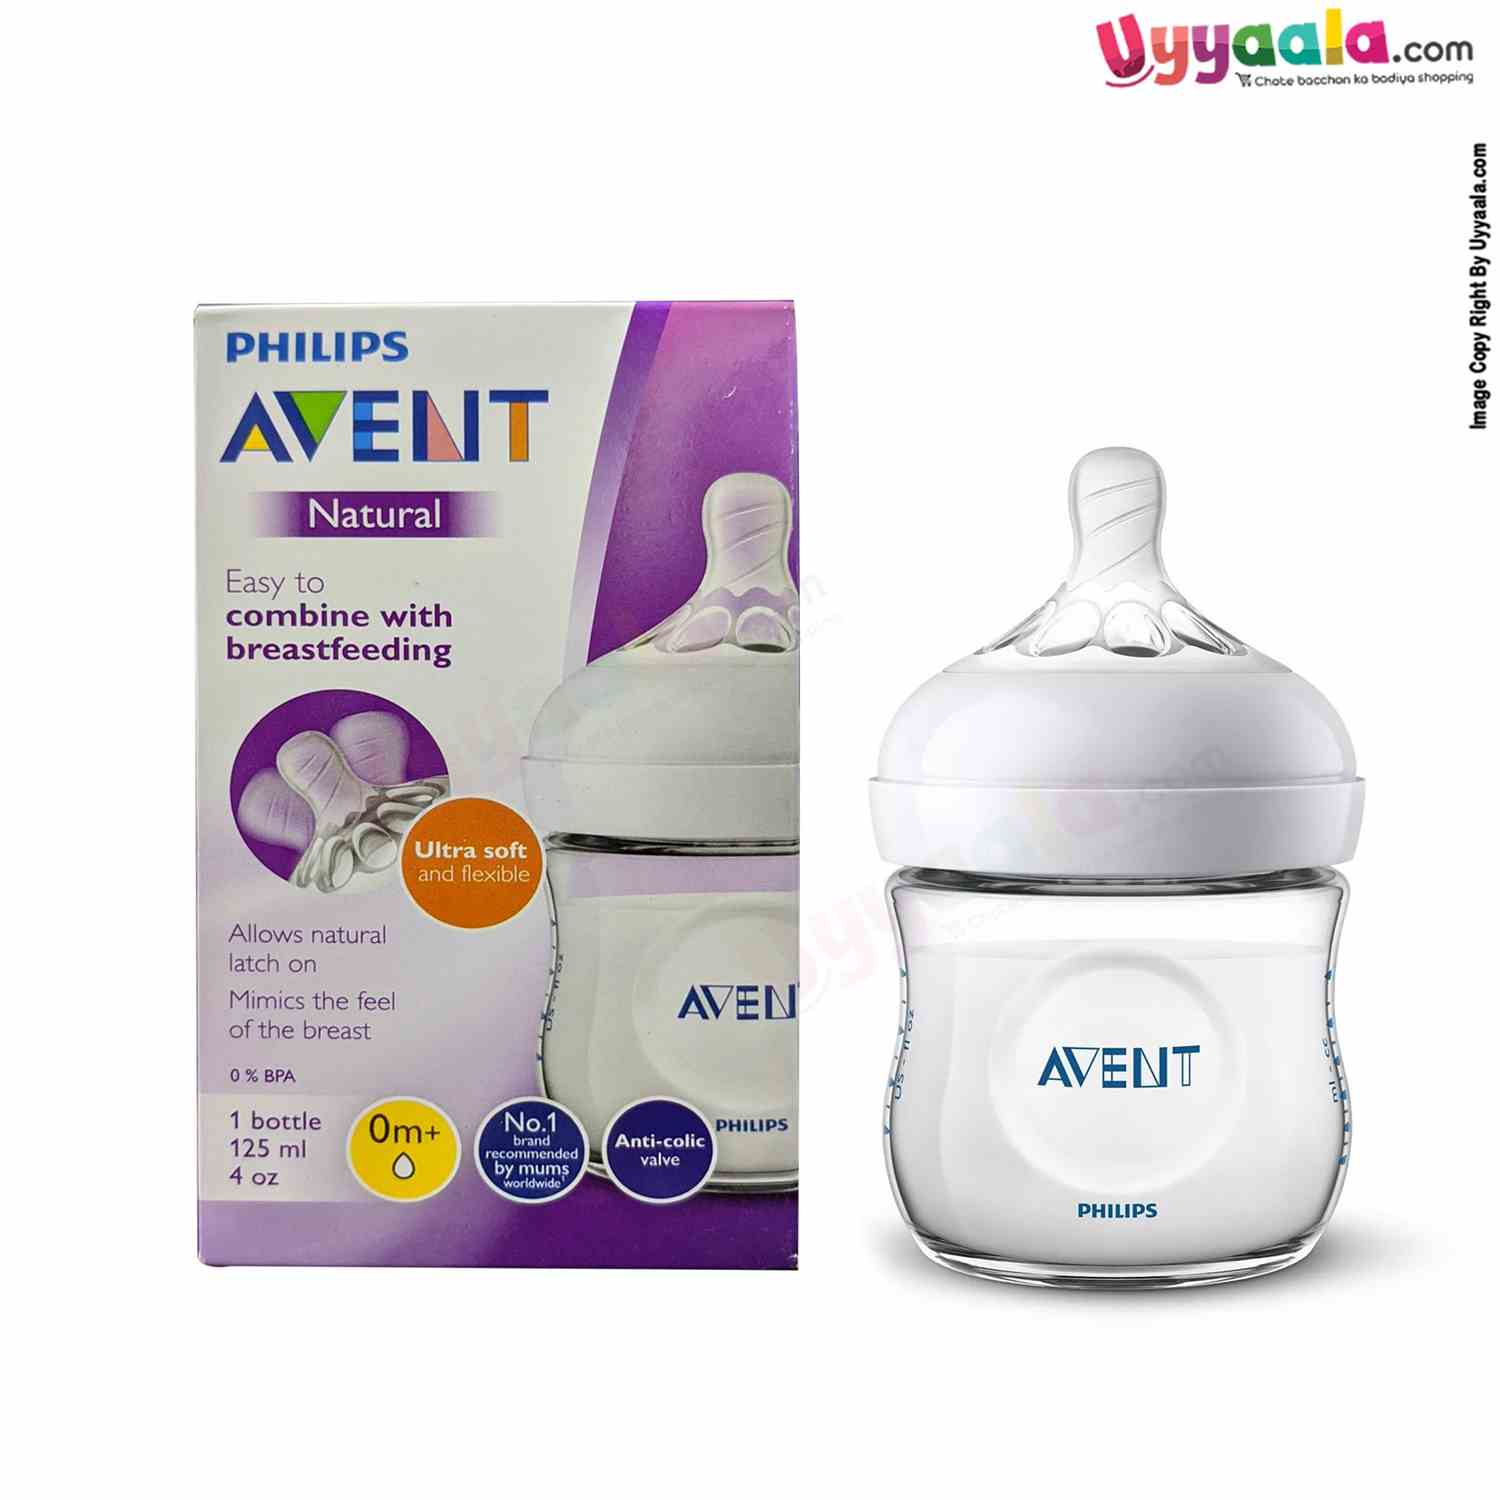 Buy Philips Avent Baby Feeding Bottle with Teat ( Natural Flow ) Online in India at uyyaala.com